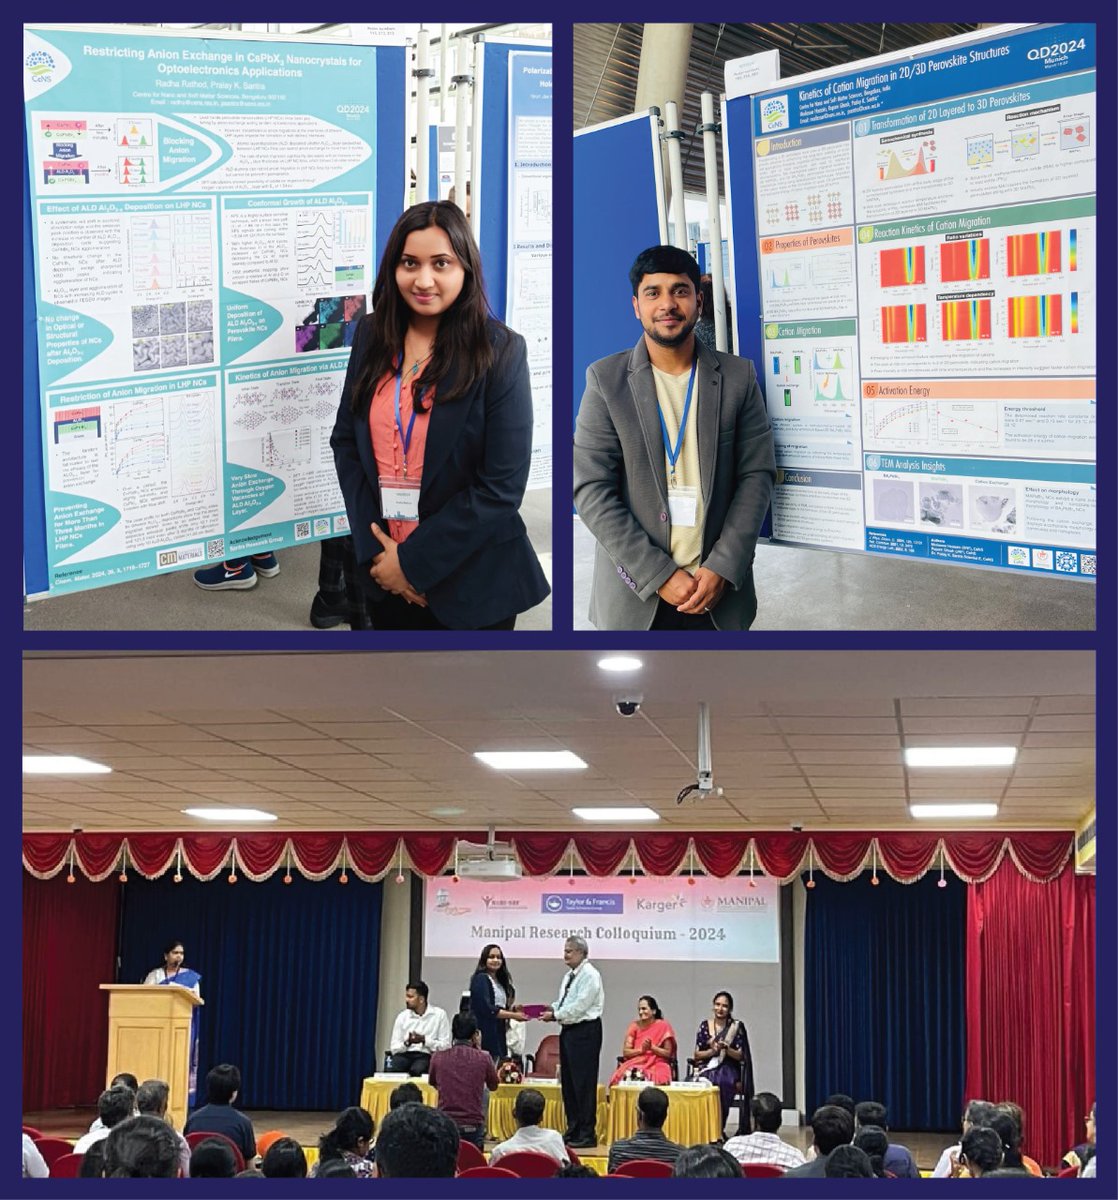 Our PhD students, Radha Rathod @radharathod1217  and Modasser Hossain, recently participated in the highly regarded QD2O24 conference in Munich. They presented their research on preventing anion migrations in CsPbX3 nanocrystals and cation migration across 2D/3D perovskites.